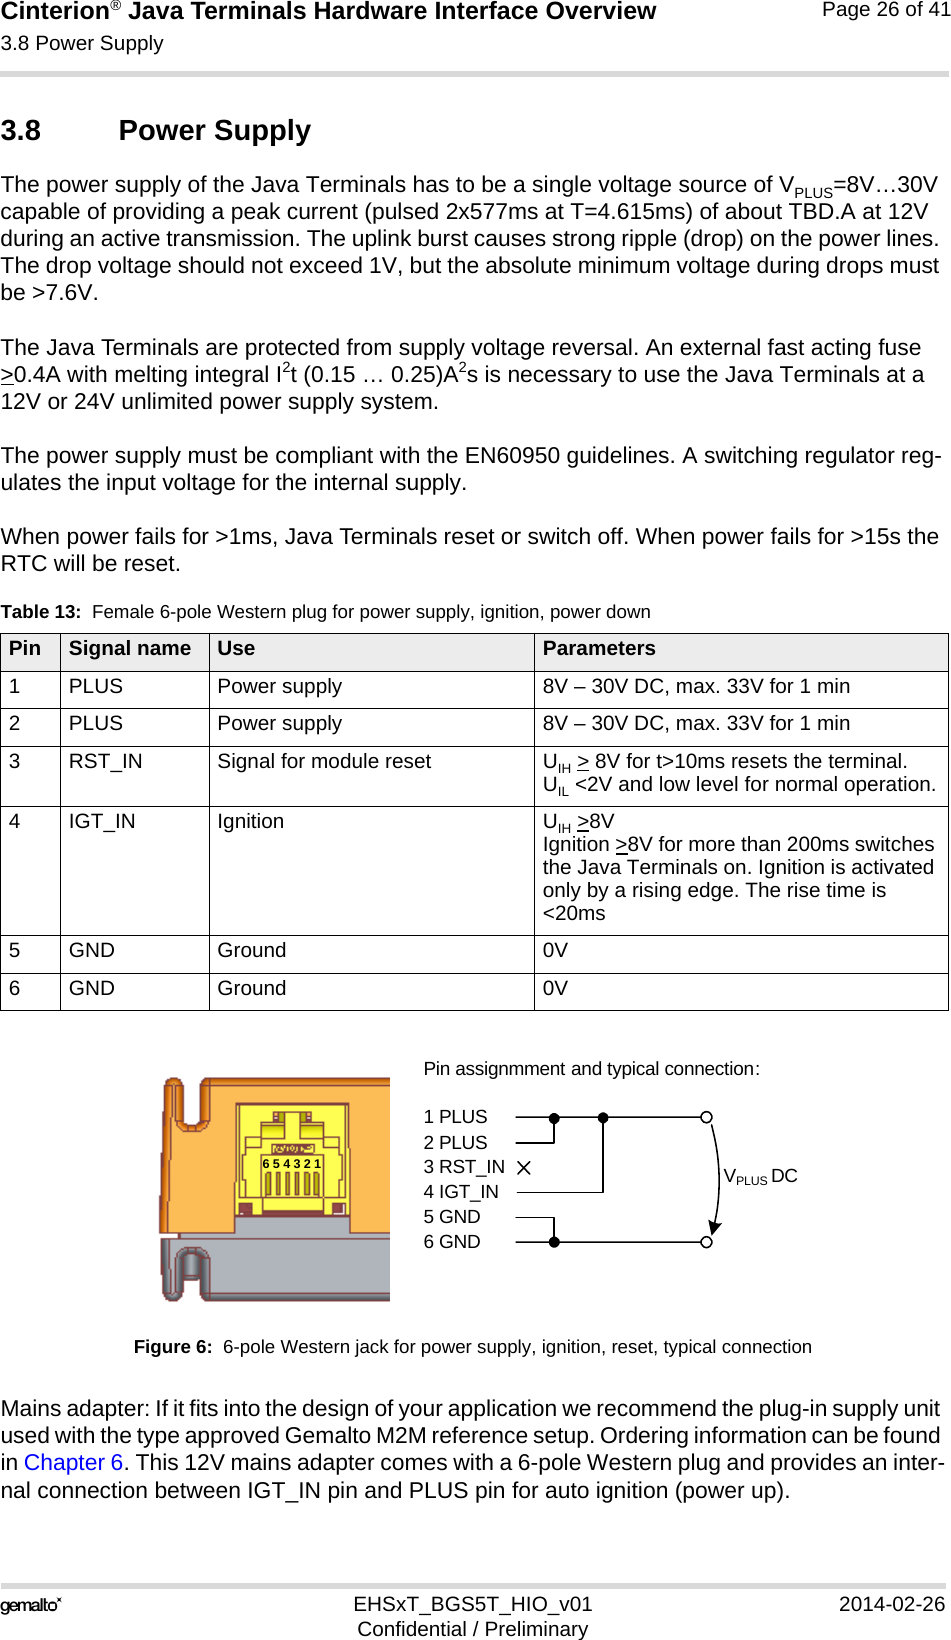 Cinterion® Java Terminals Hardware Interface Overview3.8 Power Supply32EHSxT_BGS5T_HIO_v01 2014-02-26Confidential / PreliminaryPage 26 of 413.8 Power SupplyThe power supply of the Java Terminals has to be a single voltage source of VPLUS=8V…30V capable of providing a peak current (pulsed 2x577ms at T=4.615ms) of about TBD.A at 12V during an active transmission. The uplink burst causes strong ripple (drop) on the power lines. The drop voltage should not exceed 1V, but the absolute minimum voltage during drops must be &gt;7.6V. The Java Terminals are protected from supply voltage reversal. An external fast acting fuse &gt;0.4A with melting integral I2t (0.15 … 0.25)A2s is necessary to use the Java Terminals at a 12V or 24V unlimited power supply system.The power supply must be compliant with the EN60950 guidelines. A switching regulator reg-ulates the input voltage for the internal supply.When power fails for &gt;1ms, Java Terminals reset or switch off. When power fails for &gt;15s the RTC will be reset.Figure 6:  6-pole Western jack for power supply, ignition, reset, typical connectionMains adapter: If it fits into the design of your application we recommend the plug-in supply unit used with the type approved Gemalto M2M reference setup. Ordering information can be found in Chapter 6. This 12V mains adapter comes with a 6-pole Western plug and provides an inter-nal connection between IGT_IN pin and PLUS pin for auto ignition (power up).Table 13:  Female 6-pole Western plug for power supply, ignition, power downPin Signal name Use Parameters1 PLUS Power supply 8V – 30V DC, max. 33V for 1 min2 PLUS Power supply 8V – 30V DC, max. 33V for 1 min3 RST_IN Signal for module reset UIH &gt; 8V for t&gt;10ms resets the terminal.UIL &lt;2V and low level for normal operation.4 IGT_IN Ignition UIH &gt;8VIgnition &gt;8V for more than 200ms switches the Java Terminals on. Ignition is activated only by a rising edge. The rise time is &lt;20ms5 GND Ground 0V6 GND Ground 0VPin assignmment and typical connection:1 PLUS2 PLUS3 RST_IN4 IGT_IN5 GND6 GNDVPLUS DC6 5 4 3 2 1